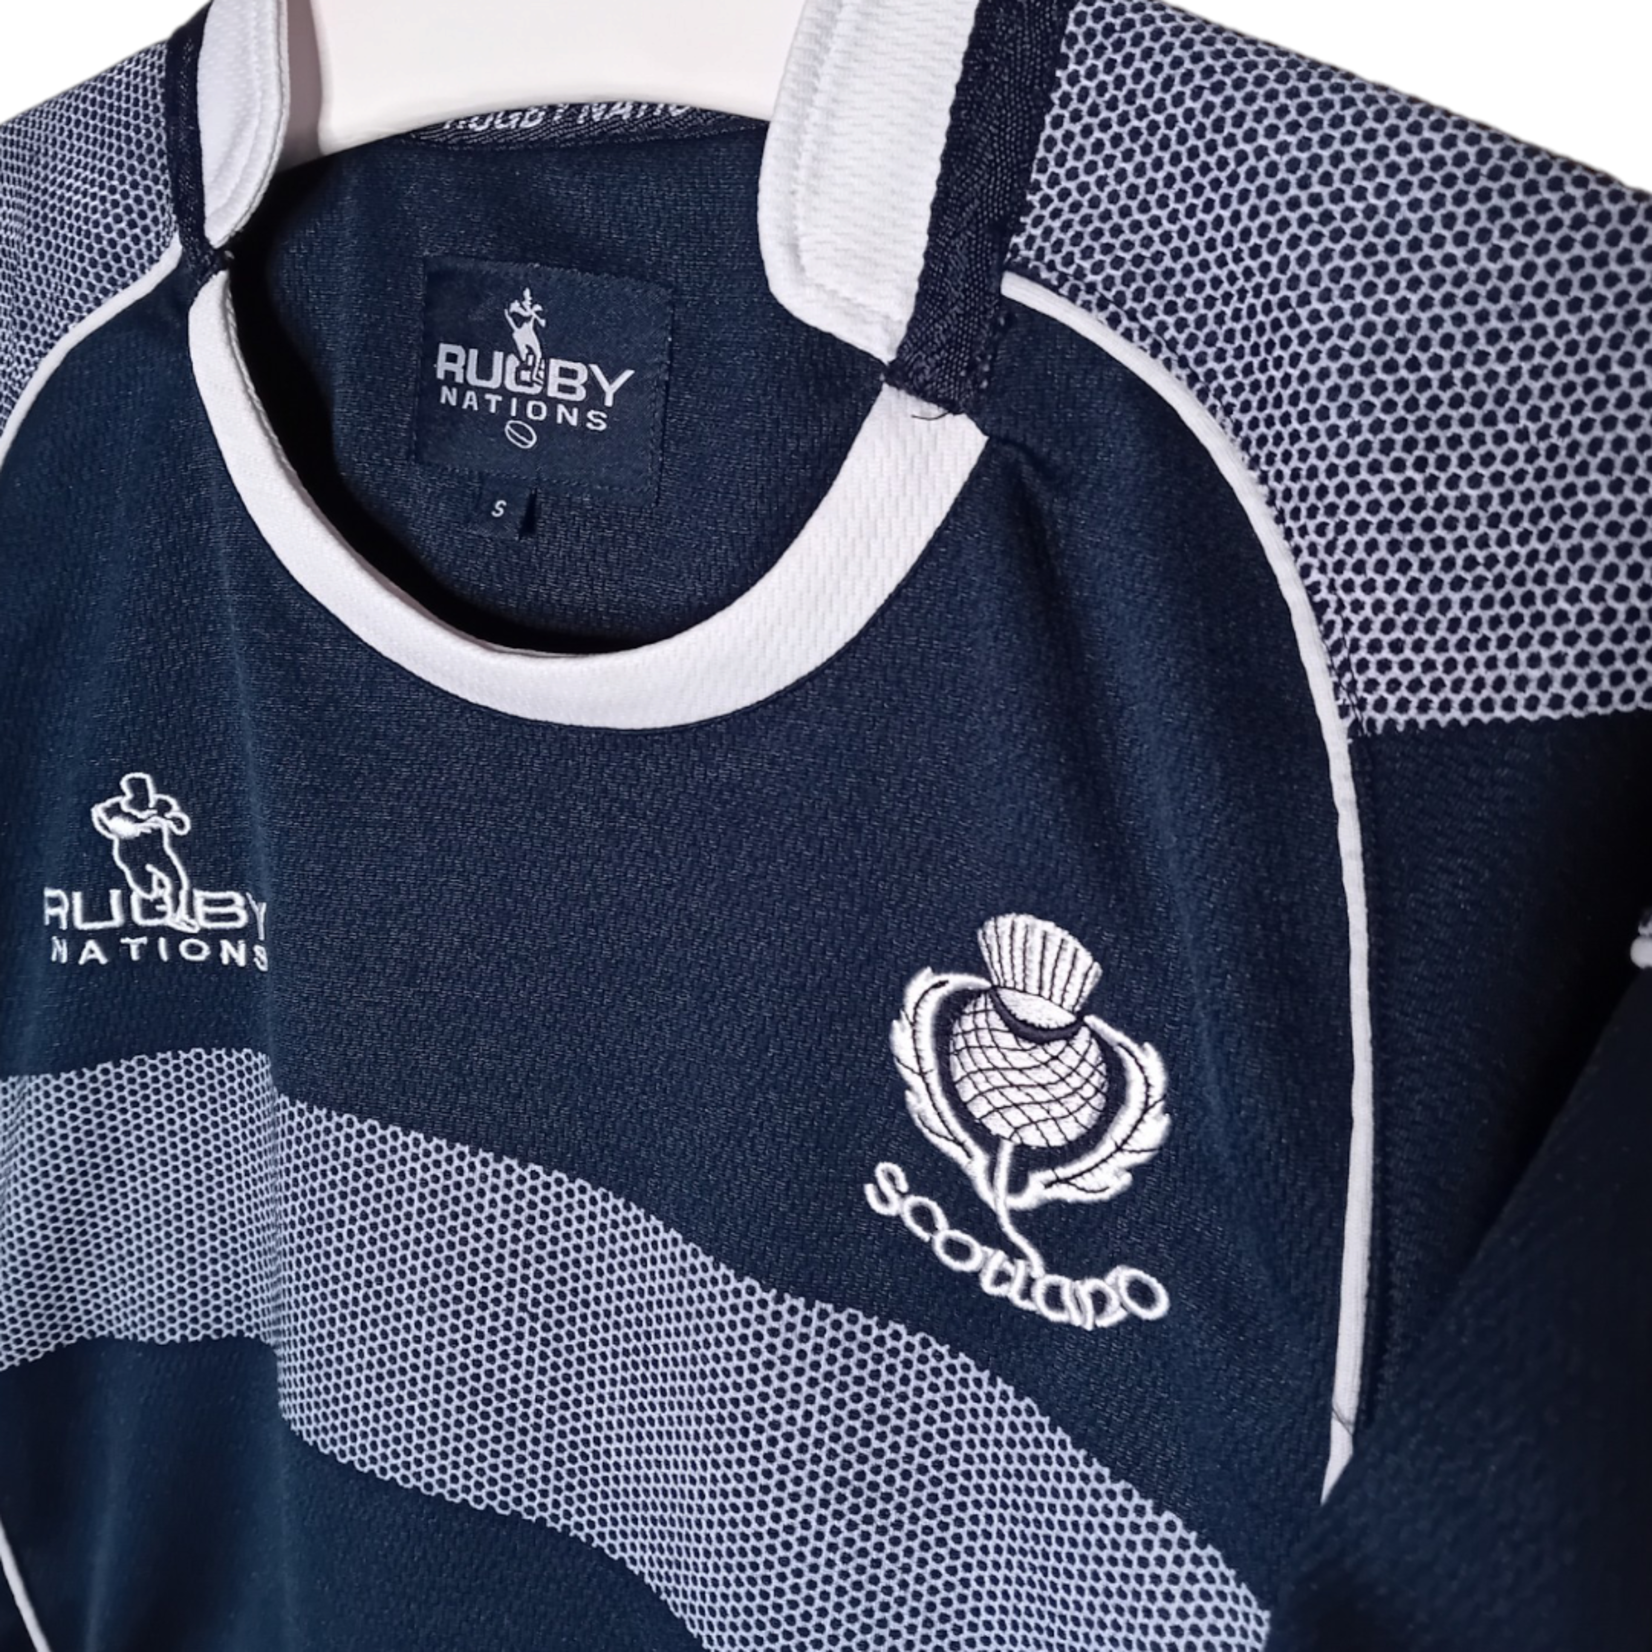 Rugby Nations Original Rugby Nations vintage rugby jersey Scotland 2007